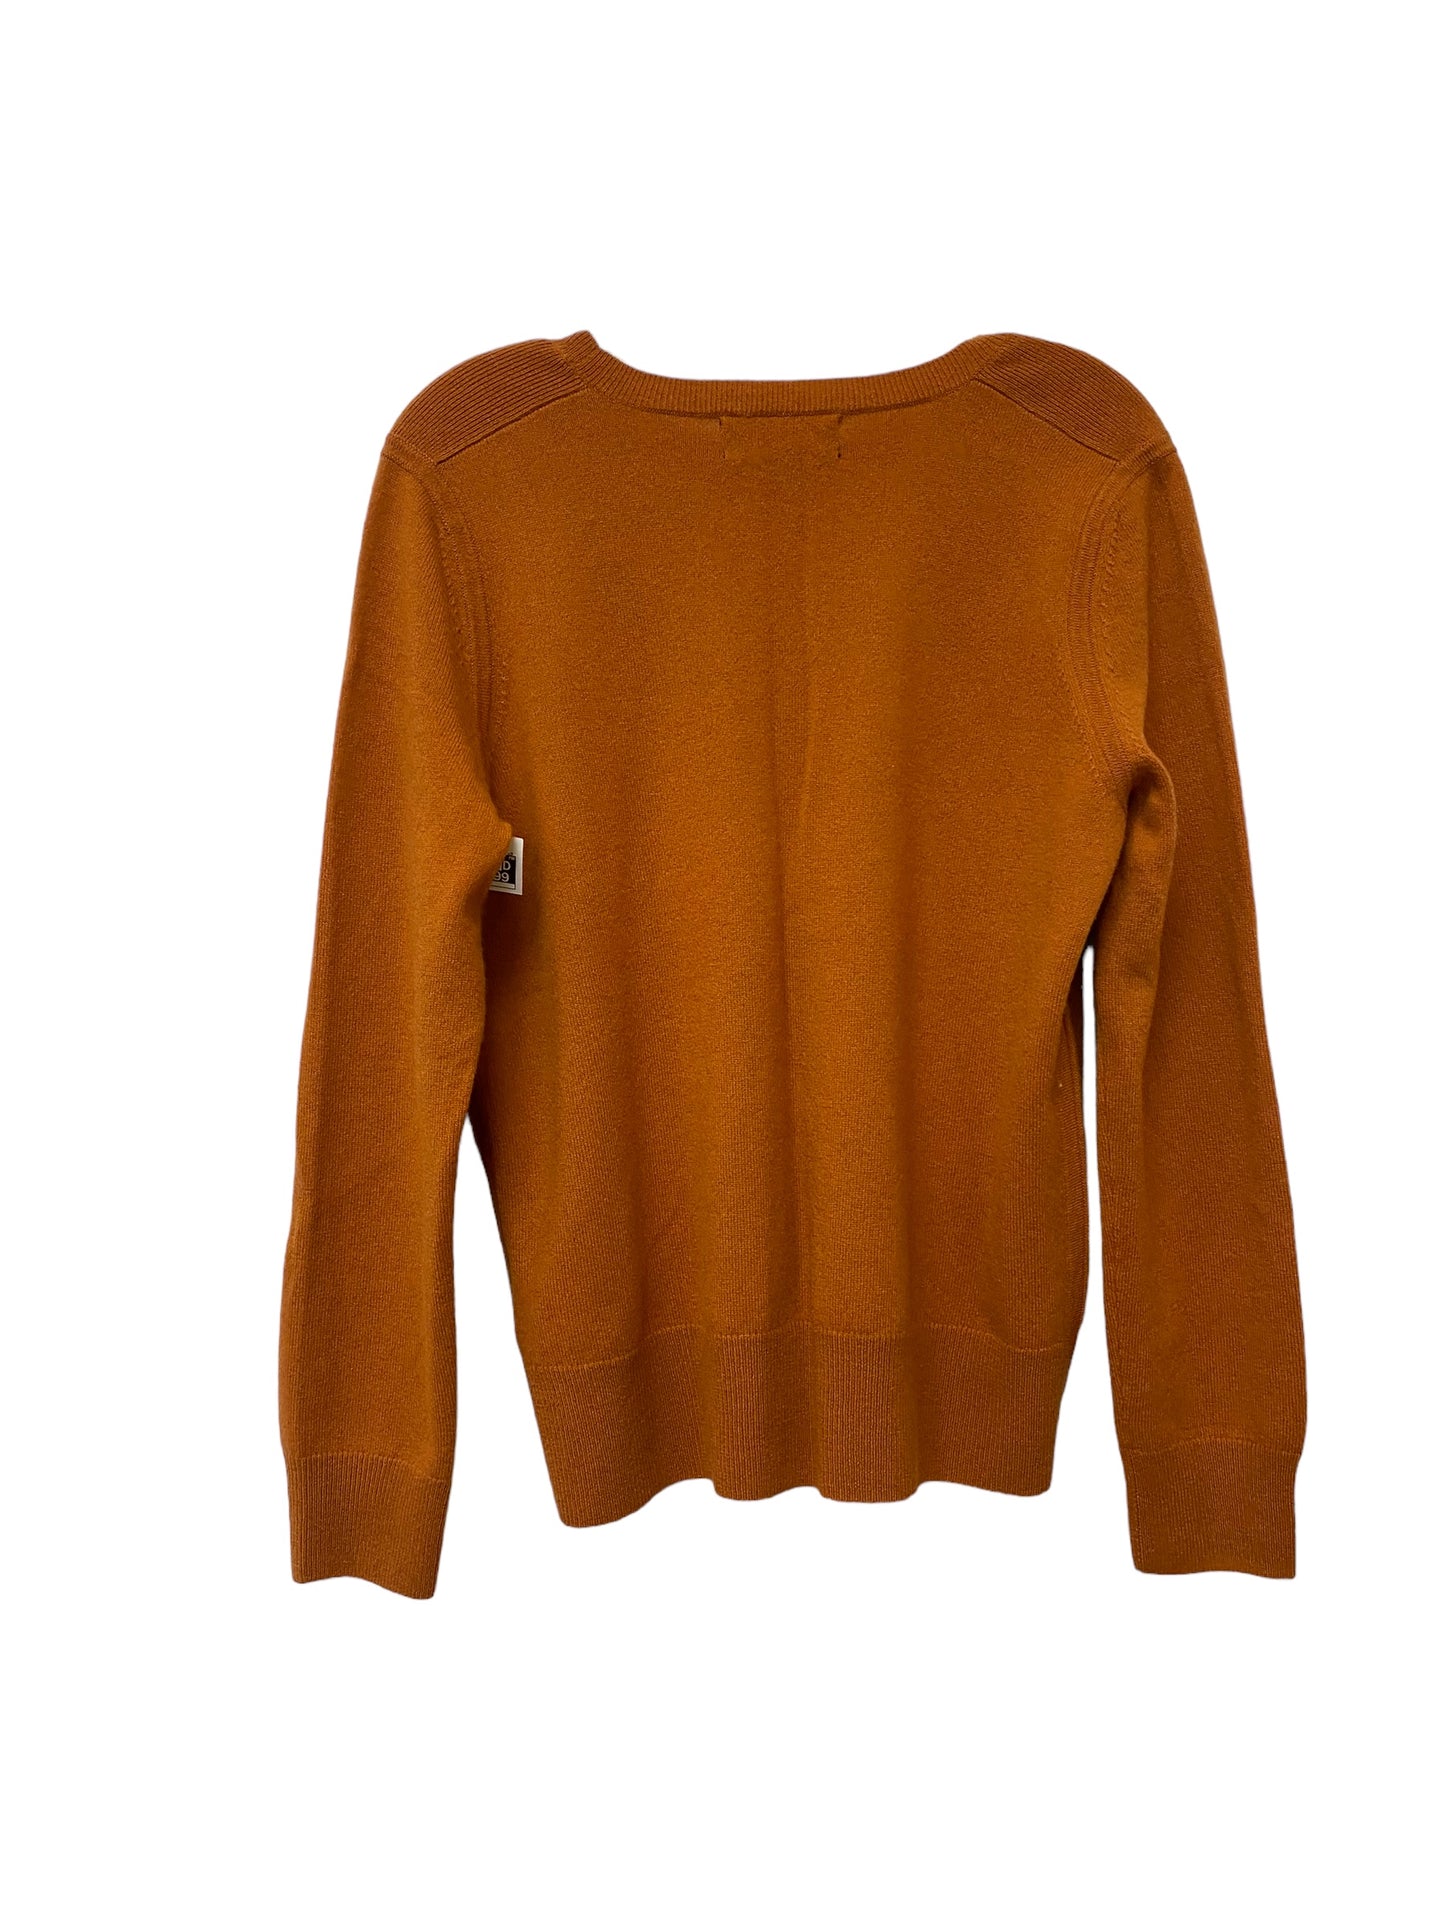 Sweater Cashmere By Banana Republic  Size: L